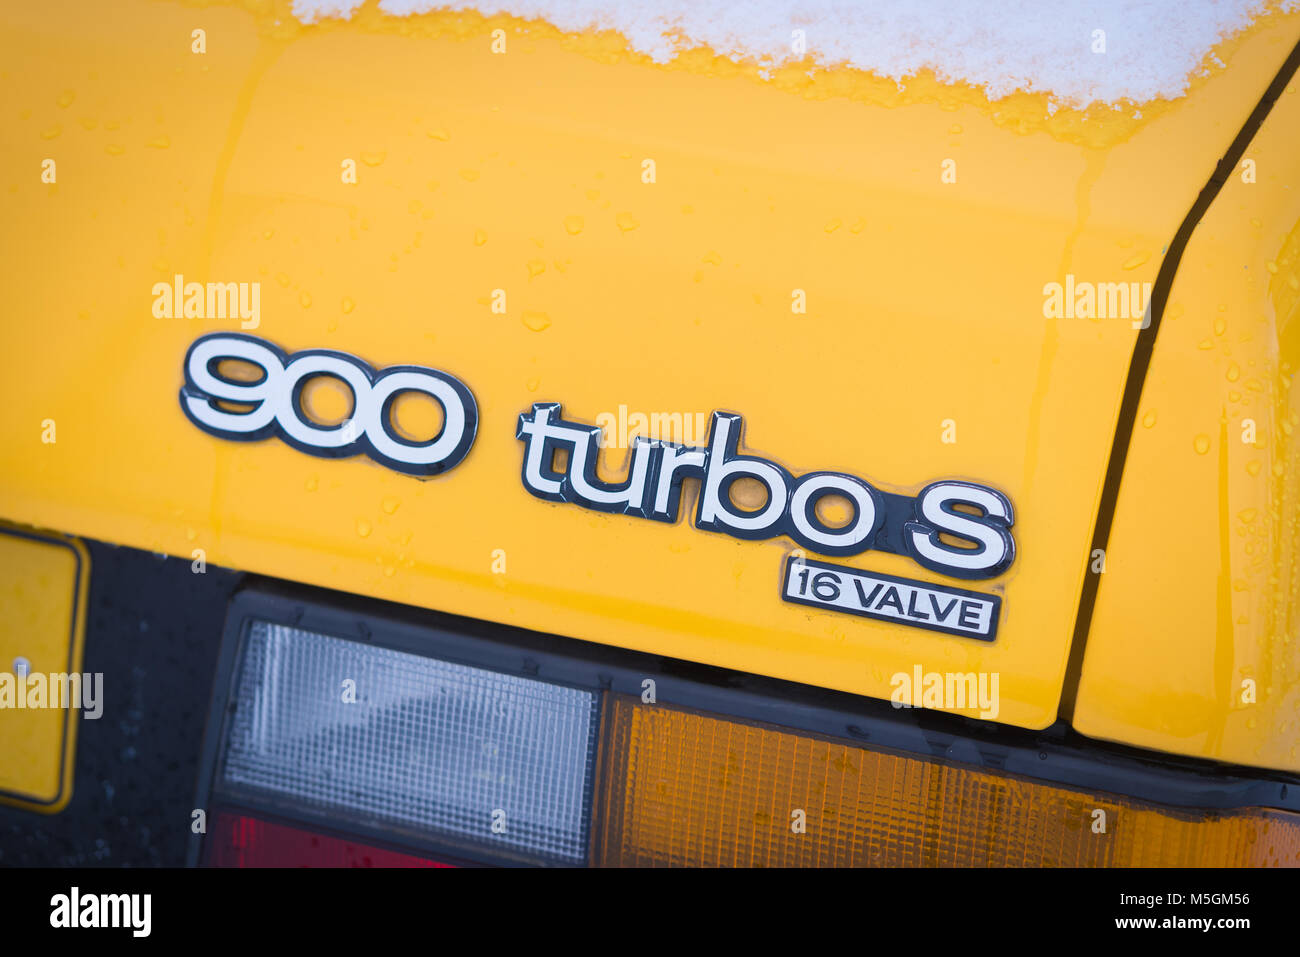 OLDENZAAL, NETHERLANDS - JANUARY 15, 2017: Detail of a yellow vintage Saab 900 turbo S convertible in snowy conditions. Stock Photo